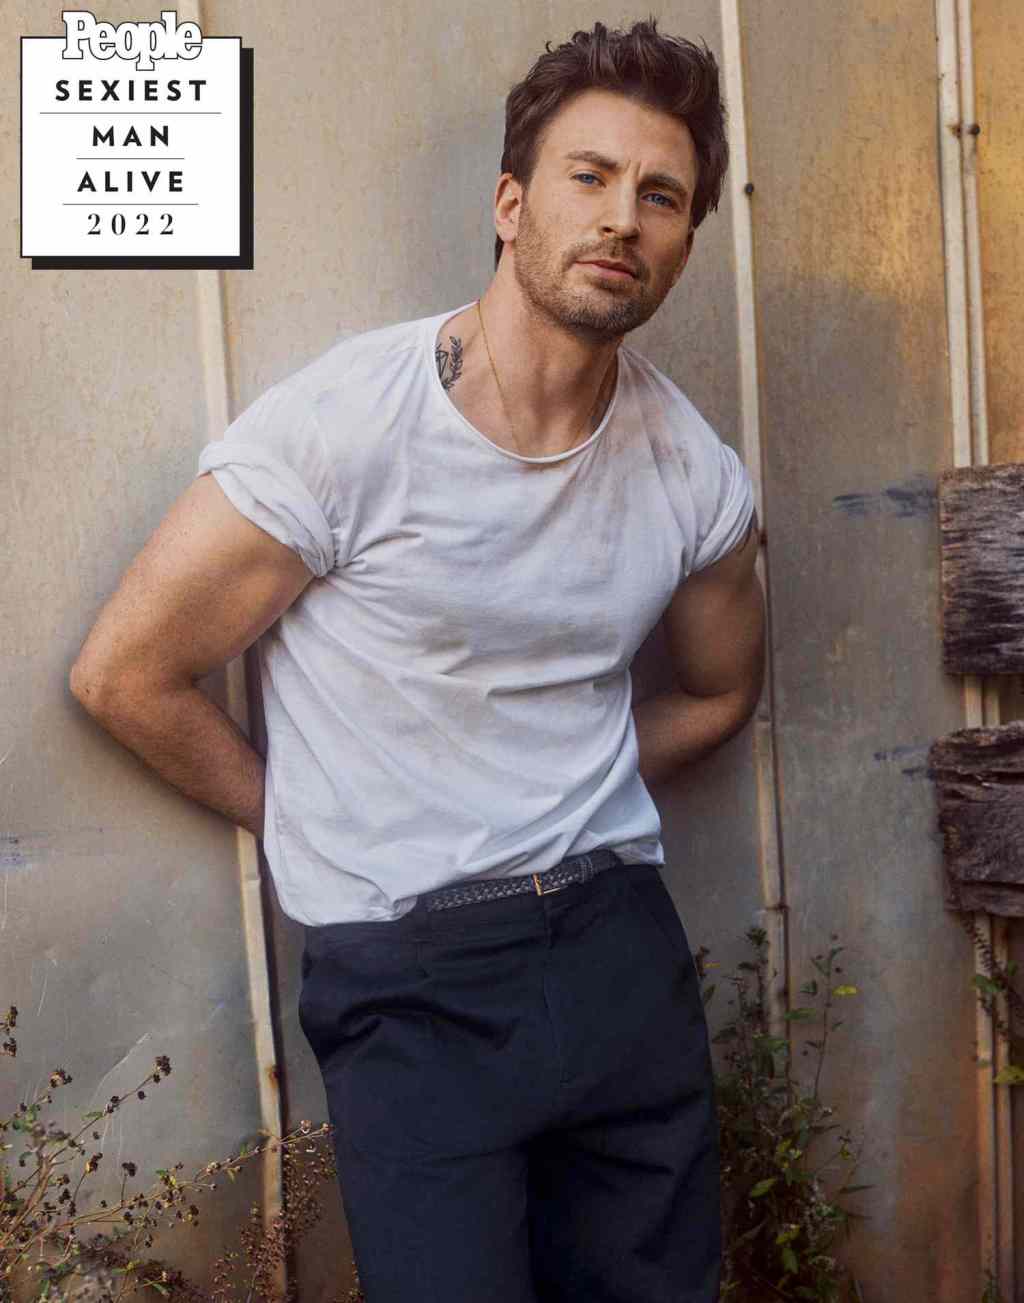 Why Chris Evans Is No Longer My Celebrity Book Boyfriend: Thoughts on Society, Race & Relationships